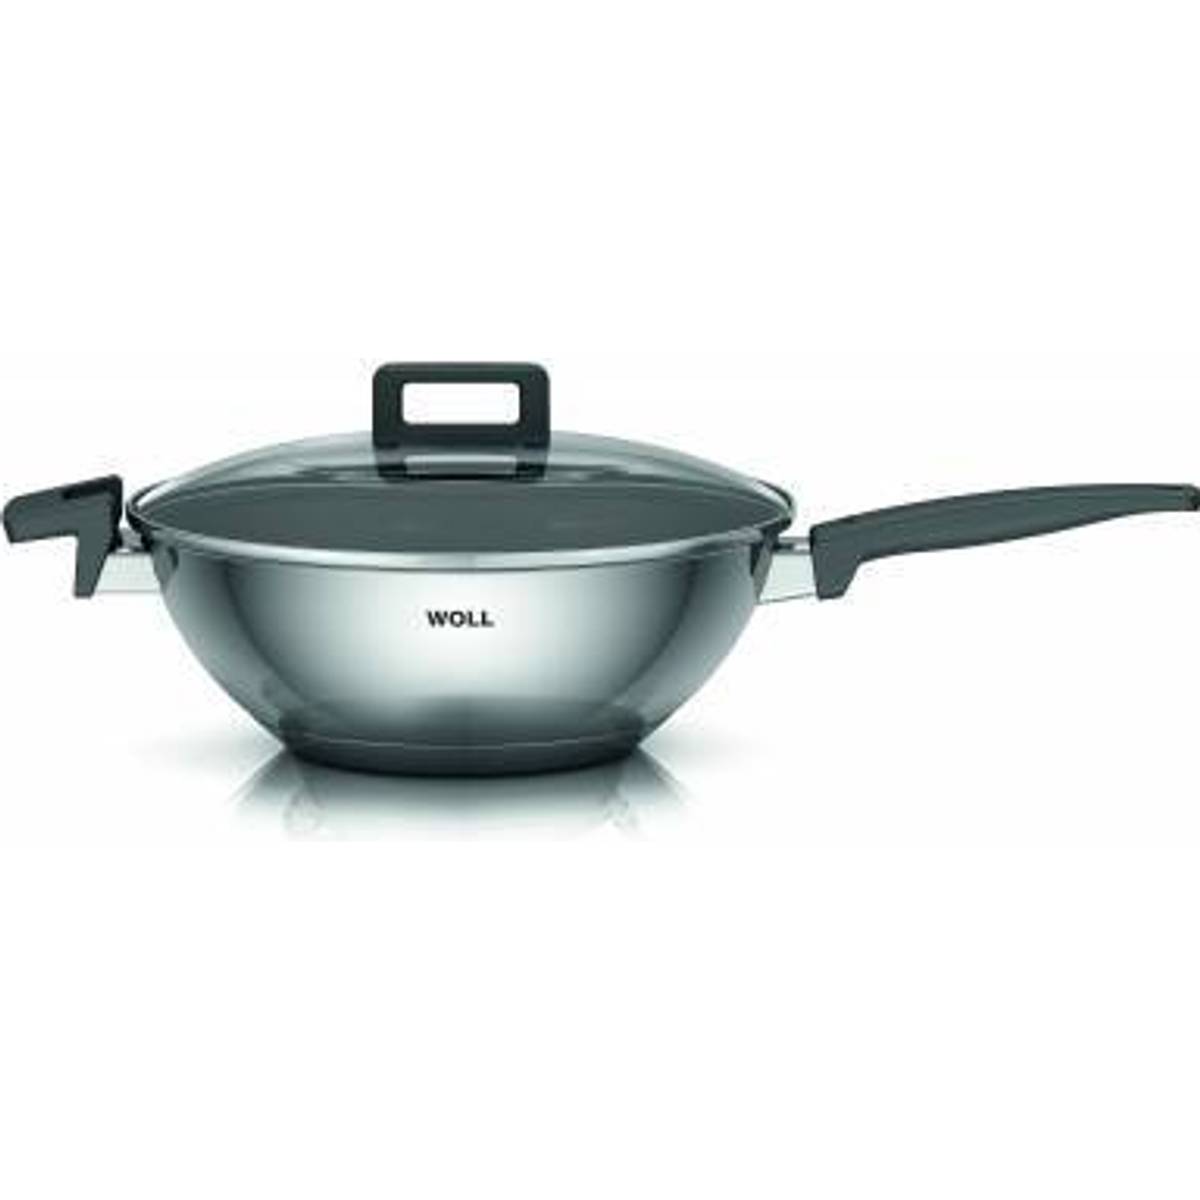 Compare best Woll Cookware prices on the market - PriceRunner